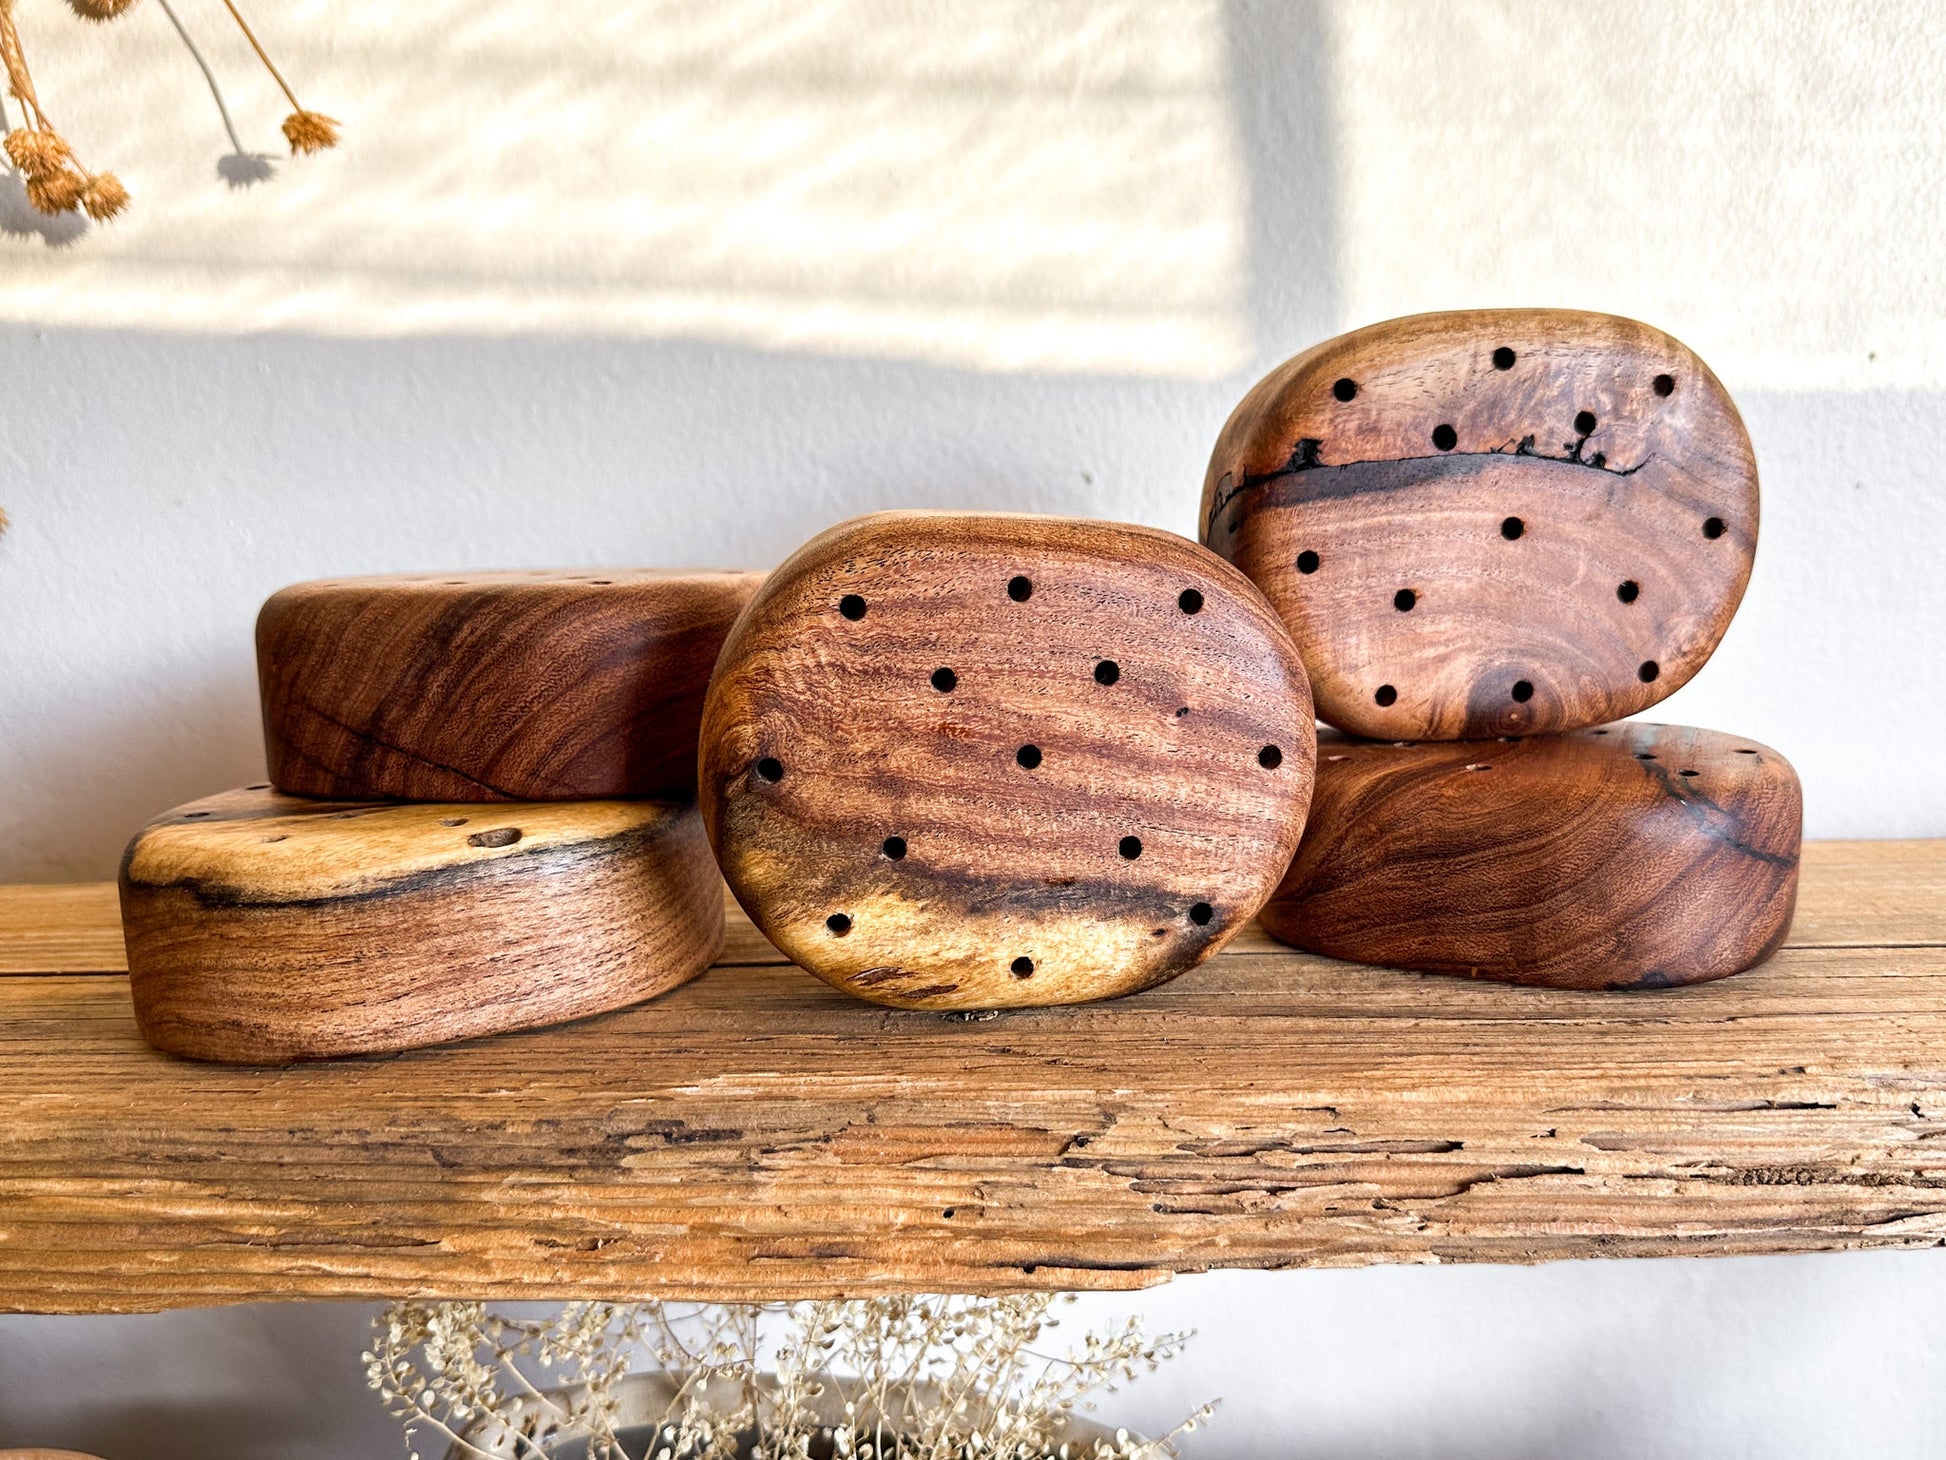 A wooden flower frog made from reclaimed mesquite. These were designed to provide a hint of warmth while giving you the creative play on height, color, texture and "flow" for your florals.